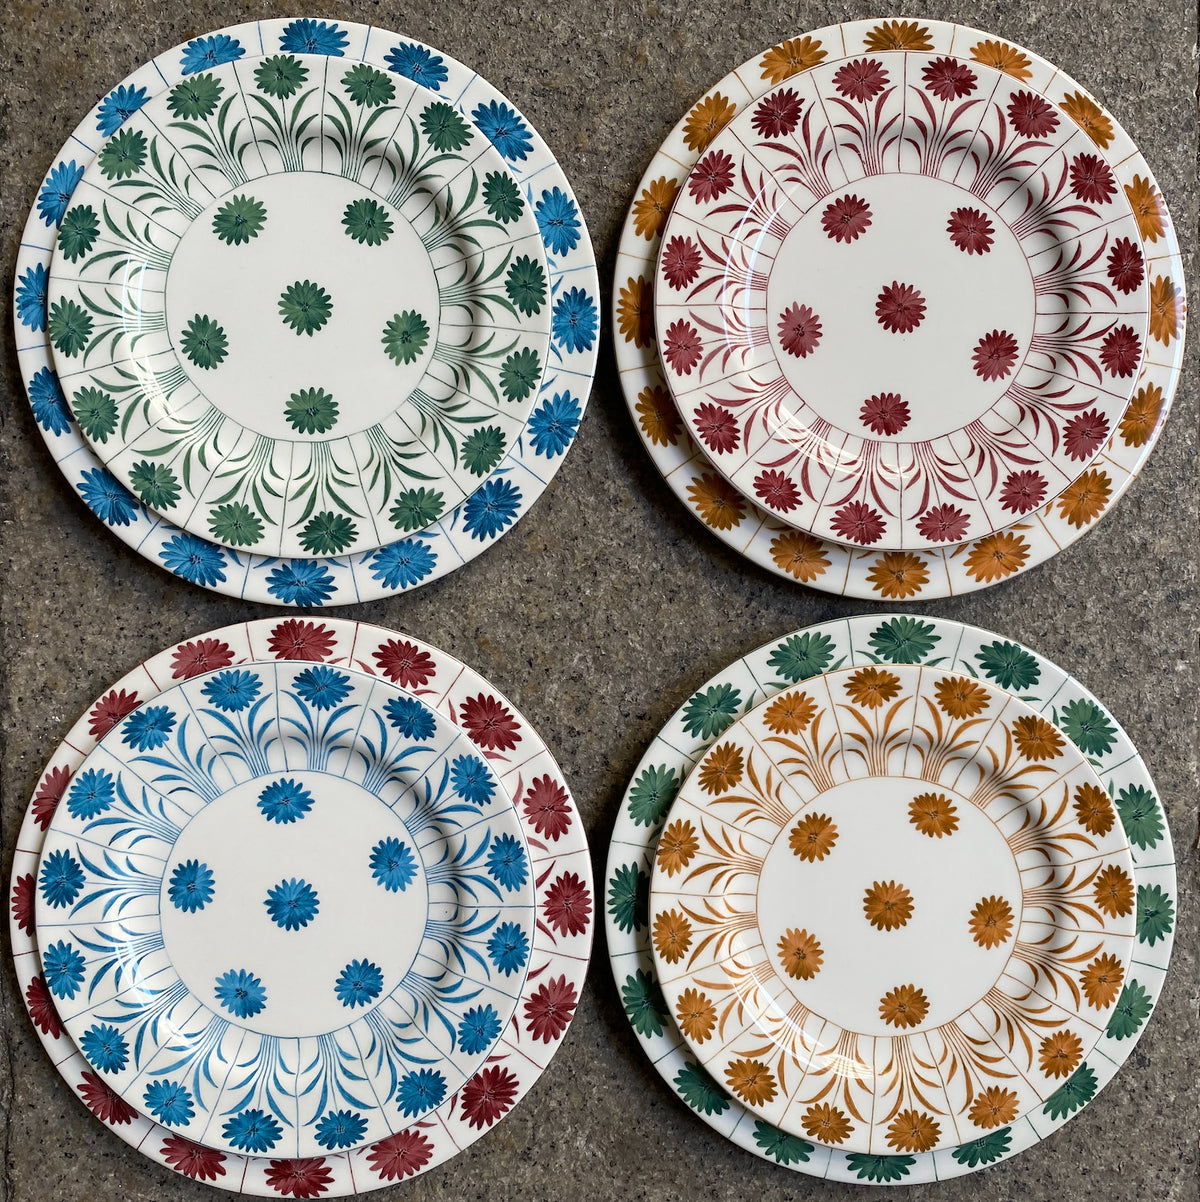 Daisy Plates Collection, Set of 4